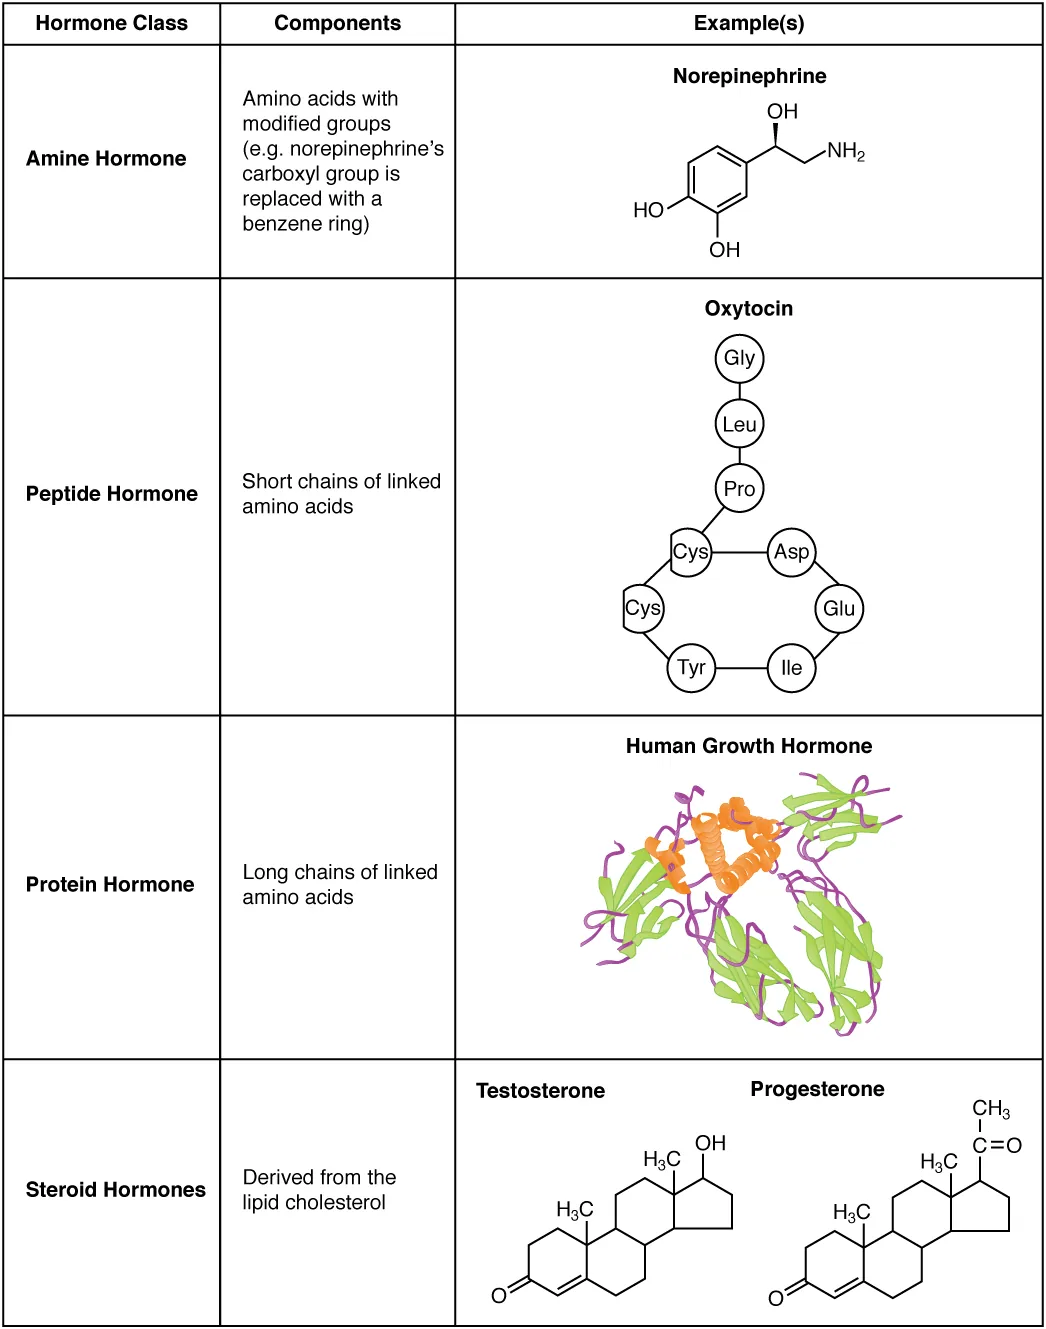 This table shows the chemical structure of amine hormones, peptide hormones, protein hormones, and steroid hormones. Amine hormones are amino acids with modified side groups. The example given is norepinephrine, which contains the NH two group typical of an amino acid, along with a hydroxyl (OH) group. The carboxyl group typical of most amino acids is replaced with a benzene ring, depicted as a hexagon of carbons that are connected by alternating single and double bonds. Peptide hormones are composed of short chains of amino acids. The example given is oxytocin, which has a chain of the following amino acids: GLY, LEU, PRO. The PRO is the bottom of the chain, which connects to a ring of the following amino acids: CYS, CYS, TYR, ILE, GLU, and ASP. Protein hormones are composed of long chains of linked amino acids. The example given is human growth hormone, which is composed of a bundle of amino acid strands, some thread-like, some coiled, and some in flat, folded sheets. Finally, steroid hormones are derived from the lipid cholesterol. Testosterone and progesterone are given as examples, which each contain several hexagonal and pentagonal carbon rings linked together.